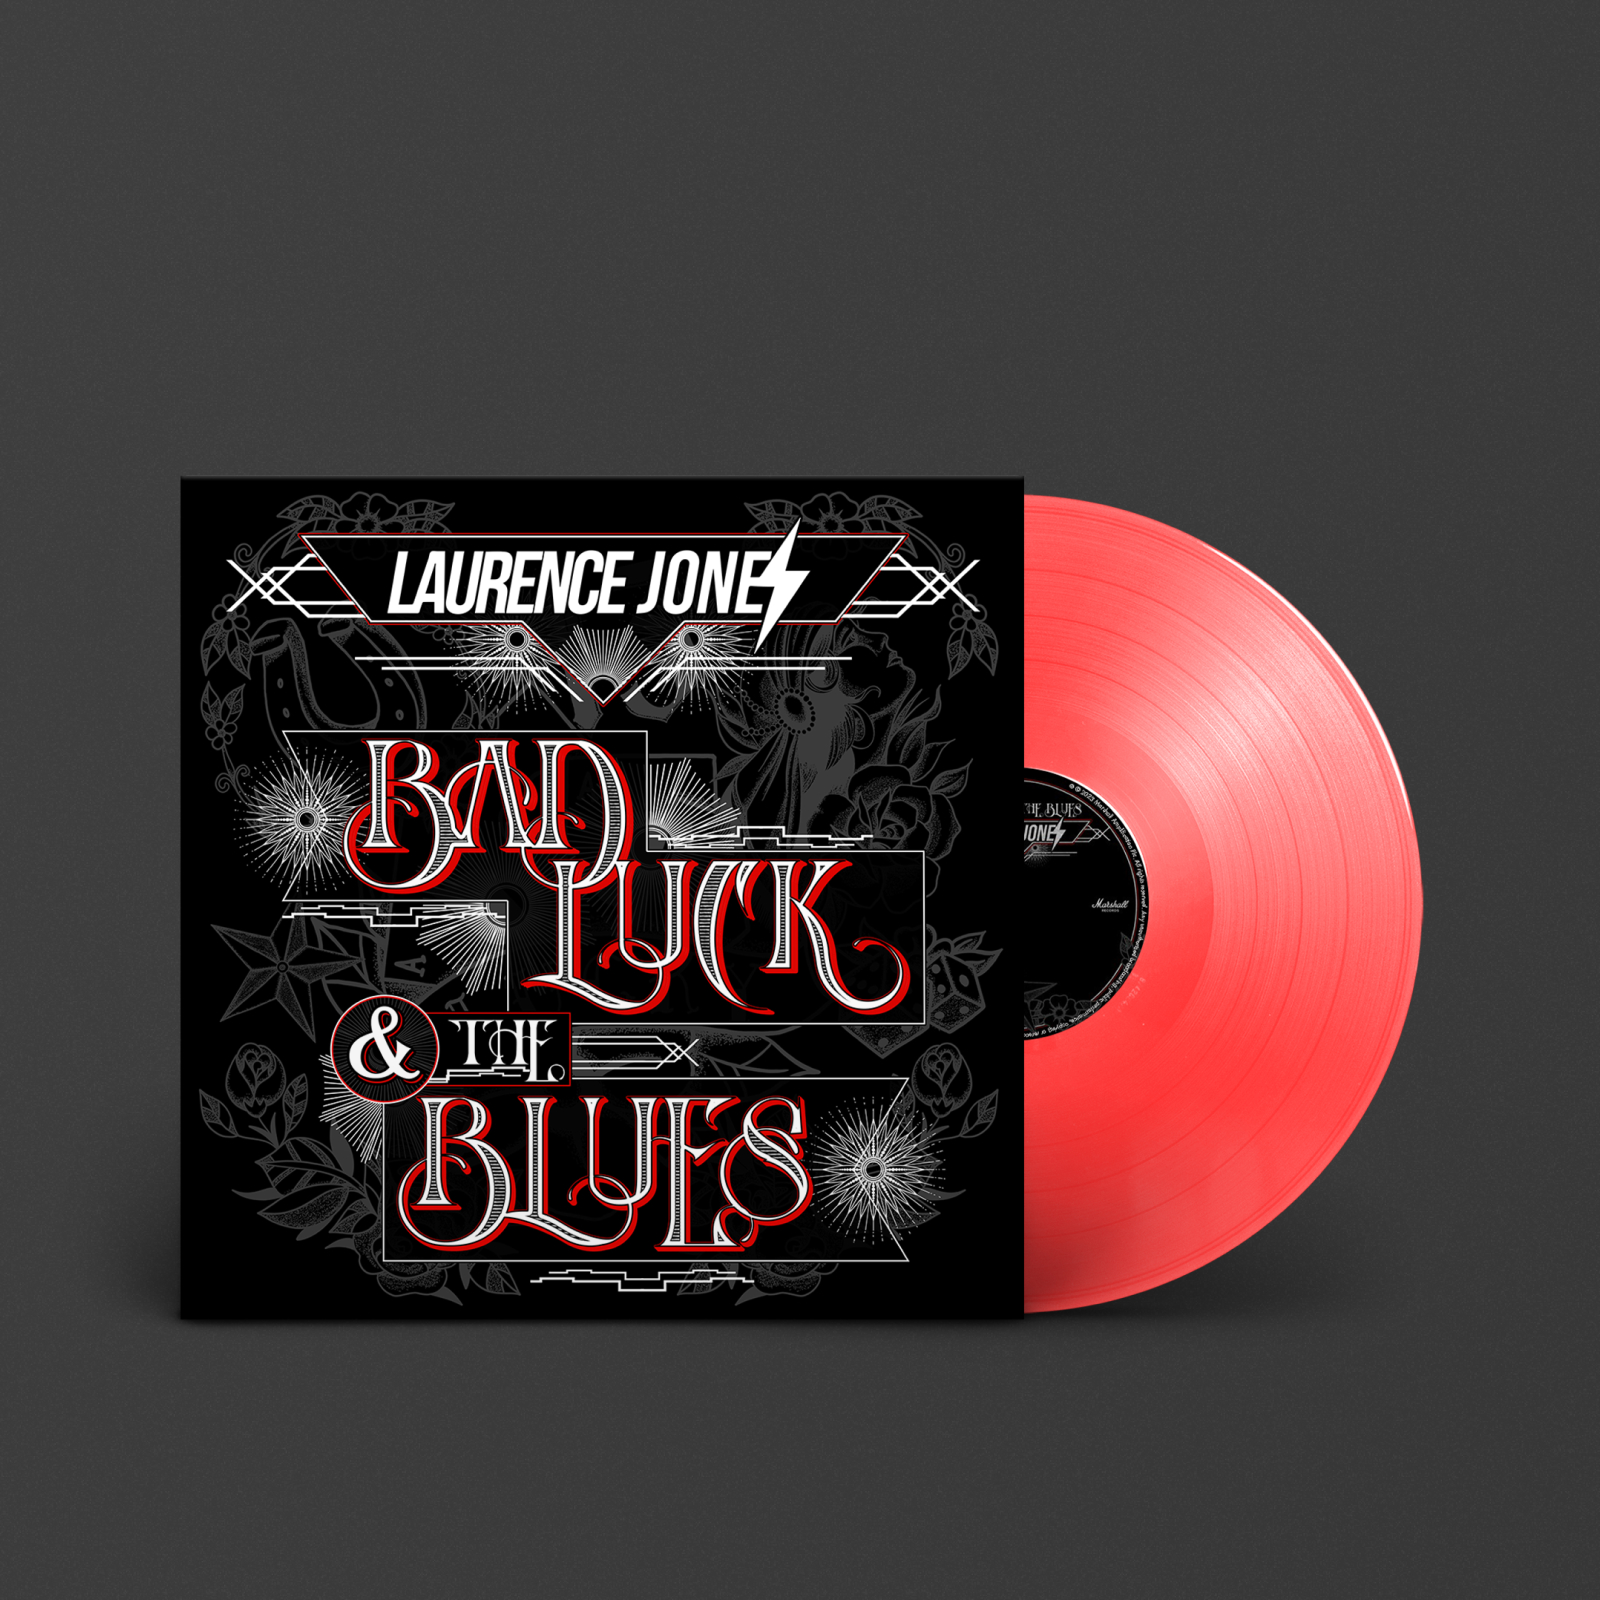 Image of a red vinyl named "Bad luck & the Blues" by Laurence Jones.